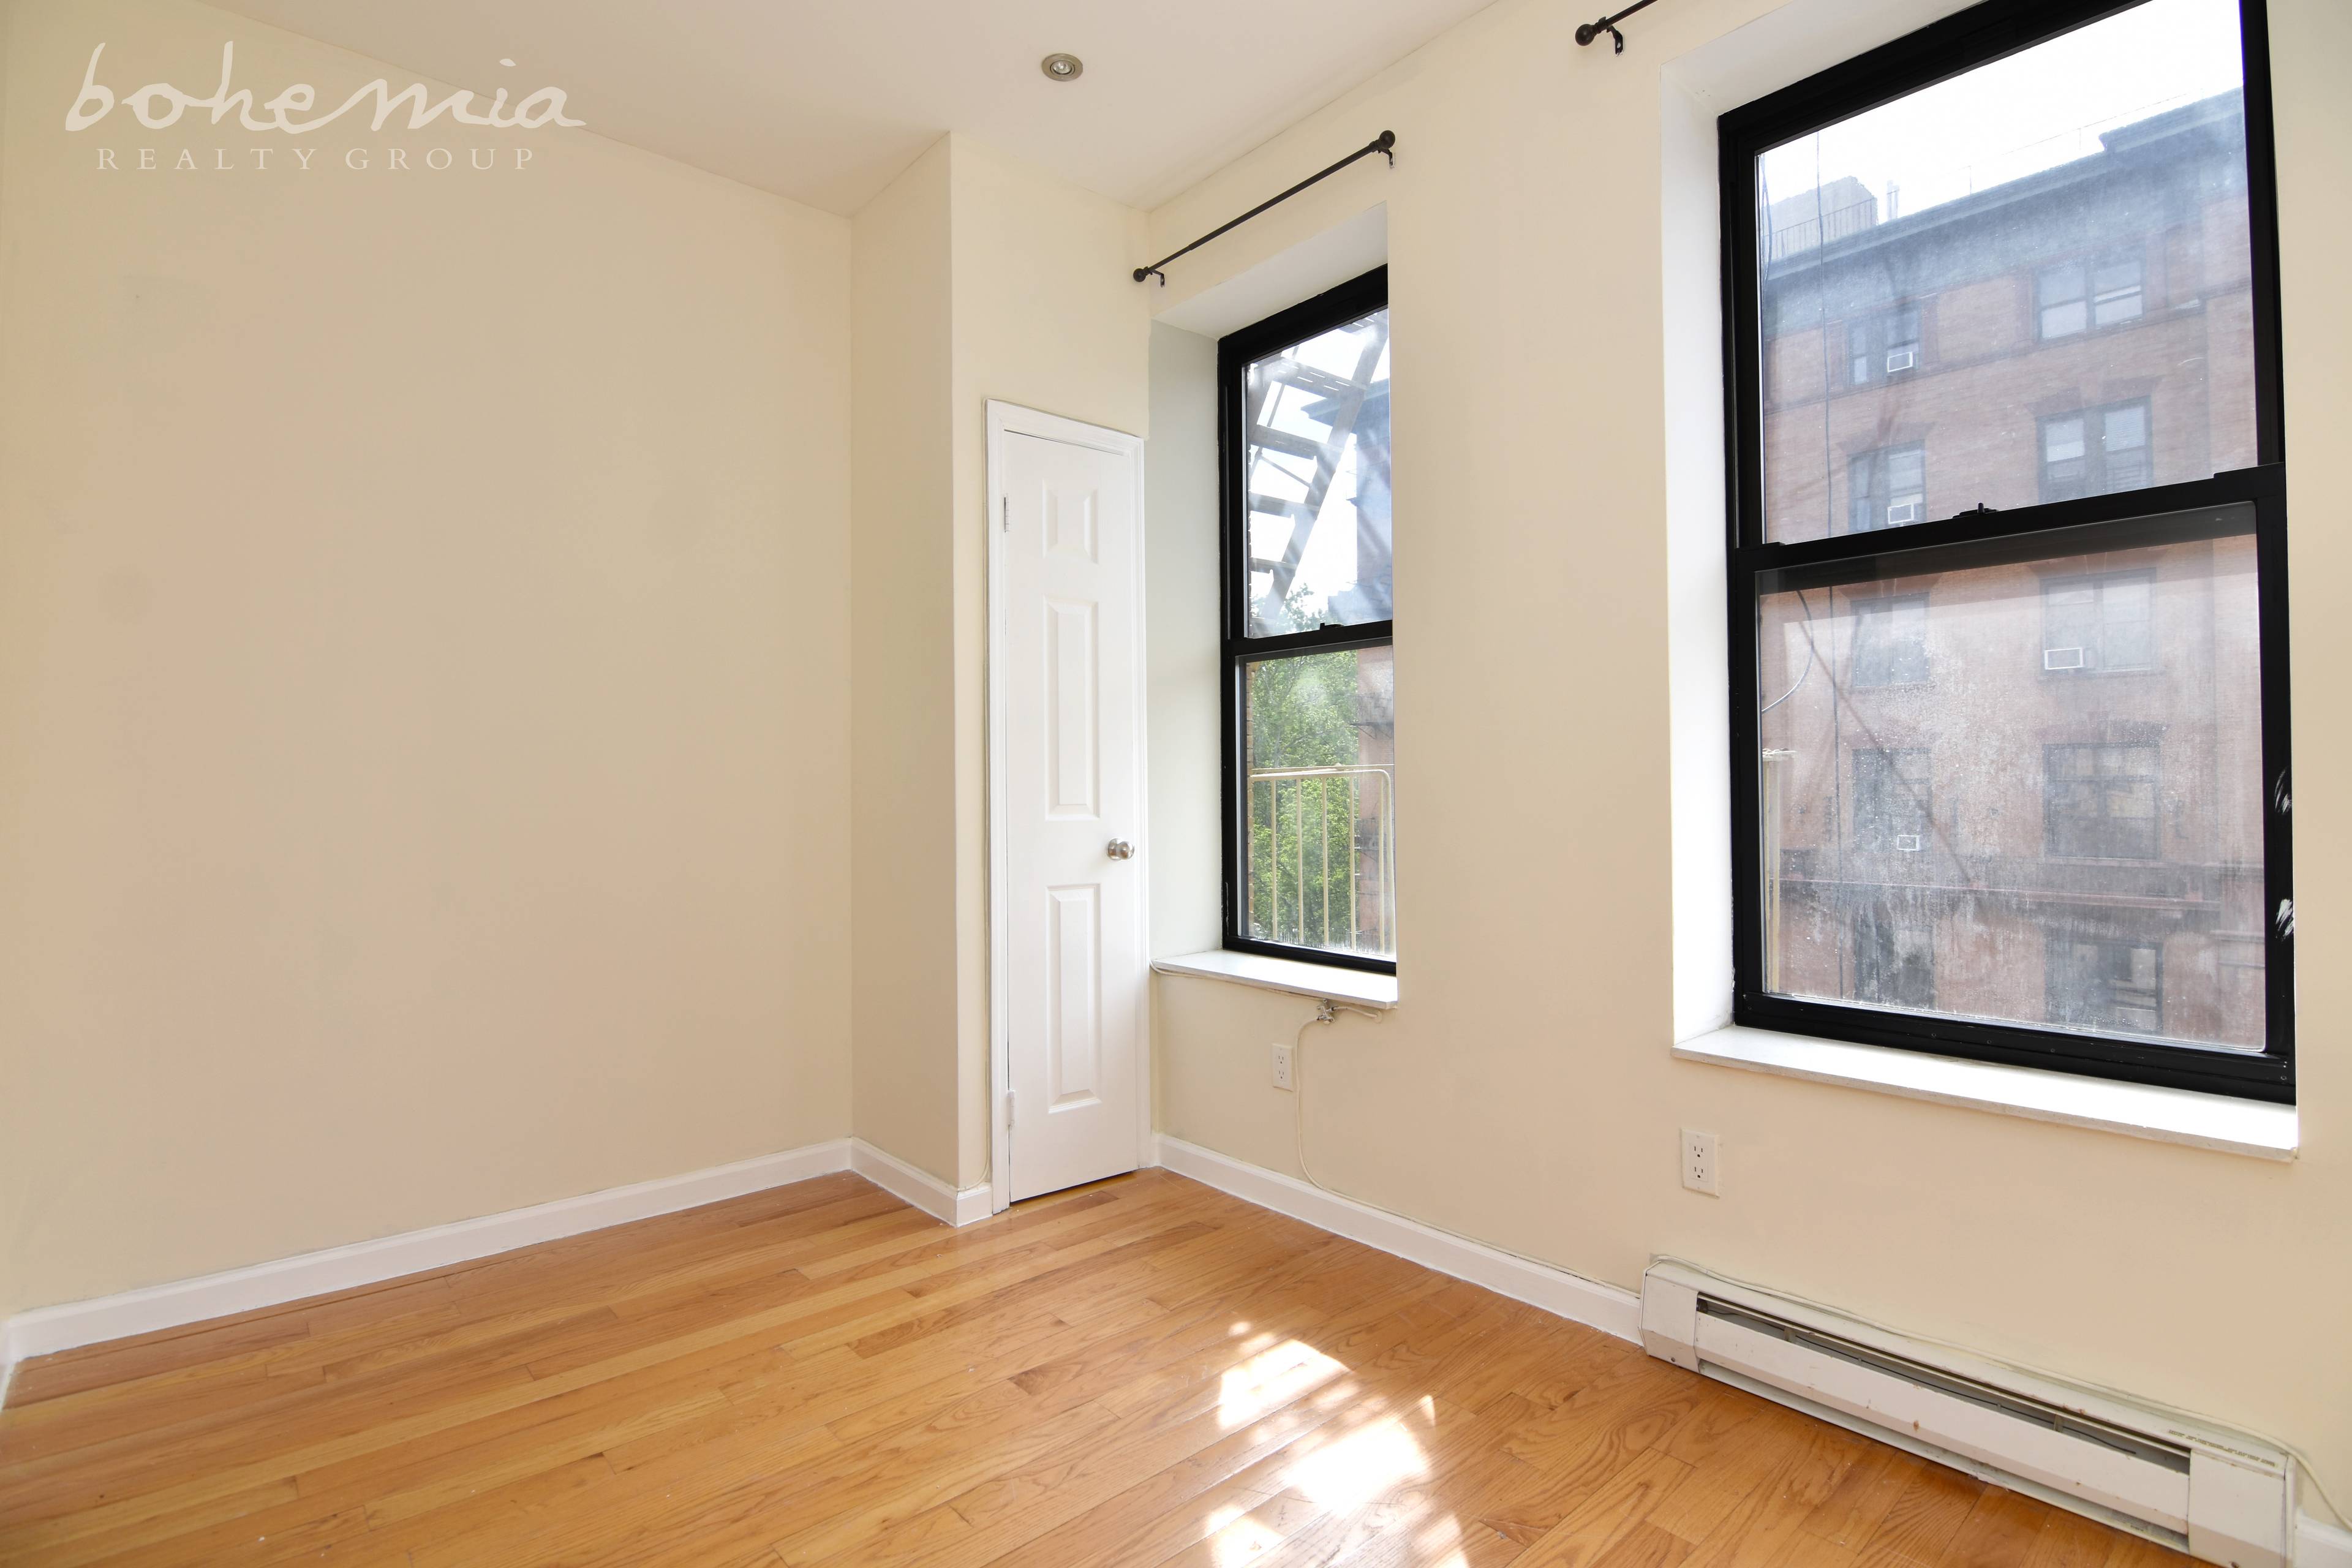 Check out this bright and sunny 4 bedroom apartment located in South Harlem !